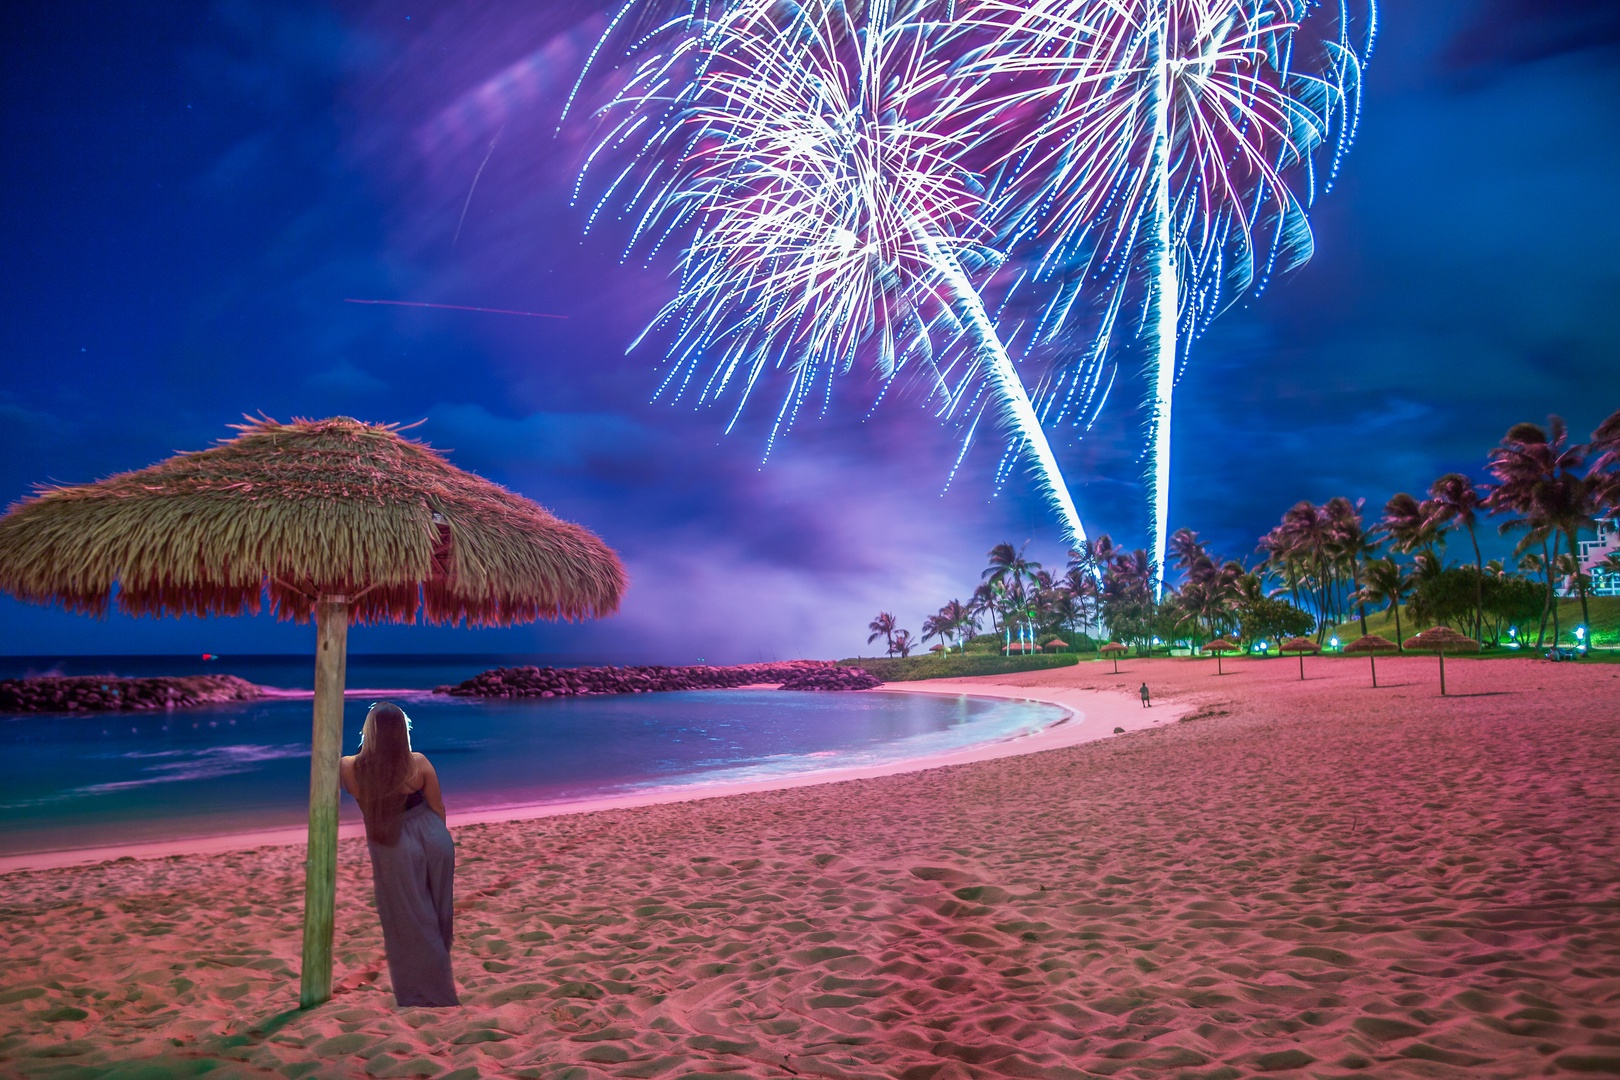 Kapolei Vacation Rentals, Coconut Plantation 1174-2 - Fireworks for a festive night at the lagoon.